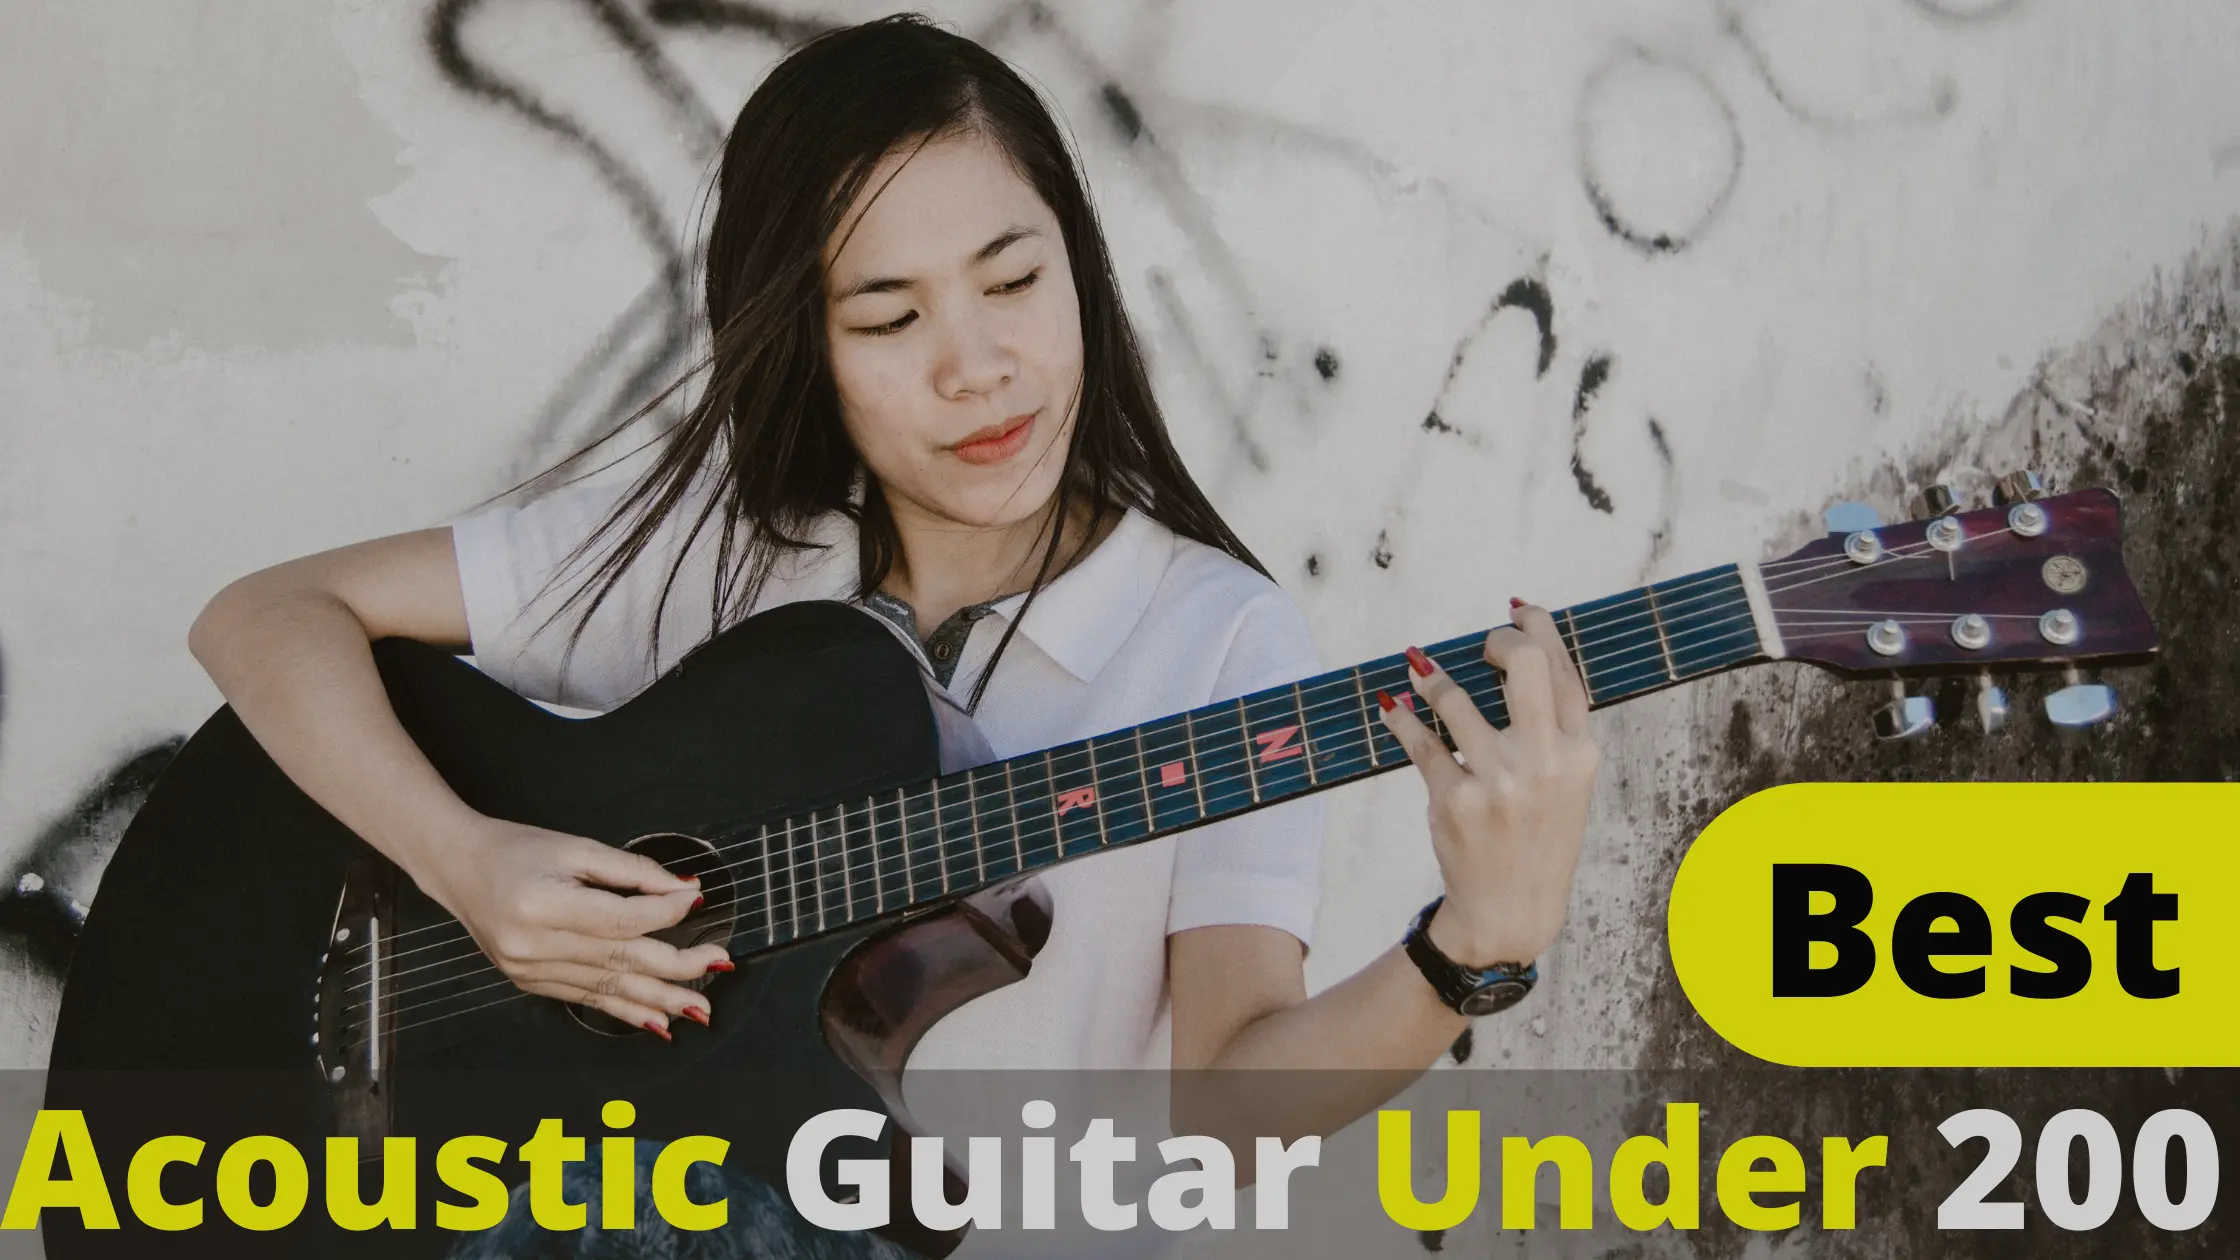 Top 10 Best Acoustic Guitar Under $200 With Product Comparison